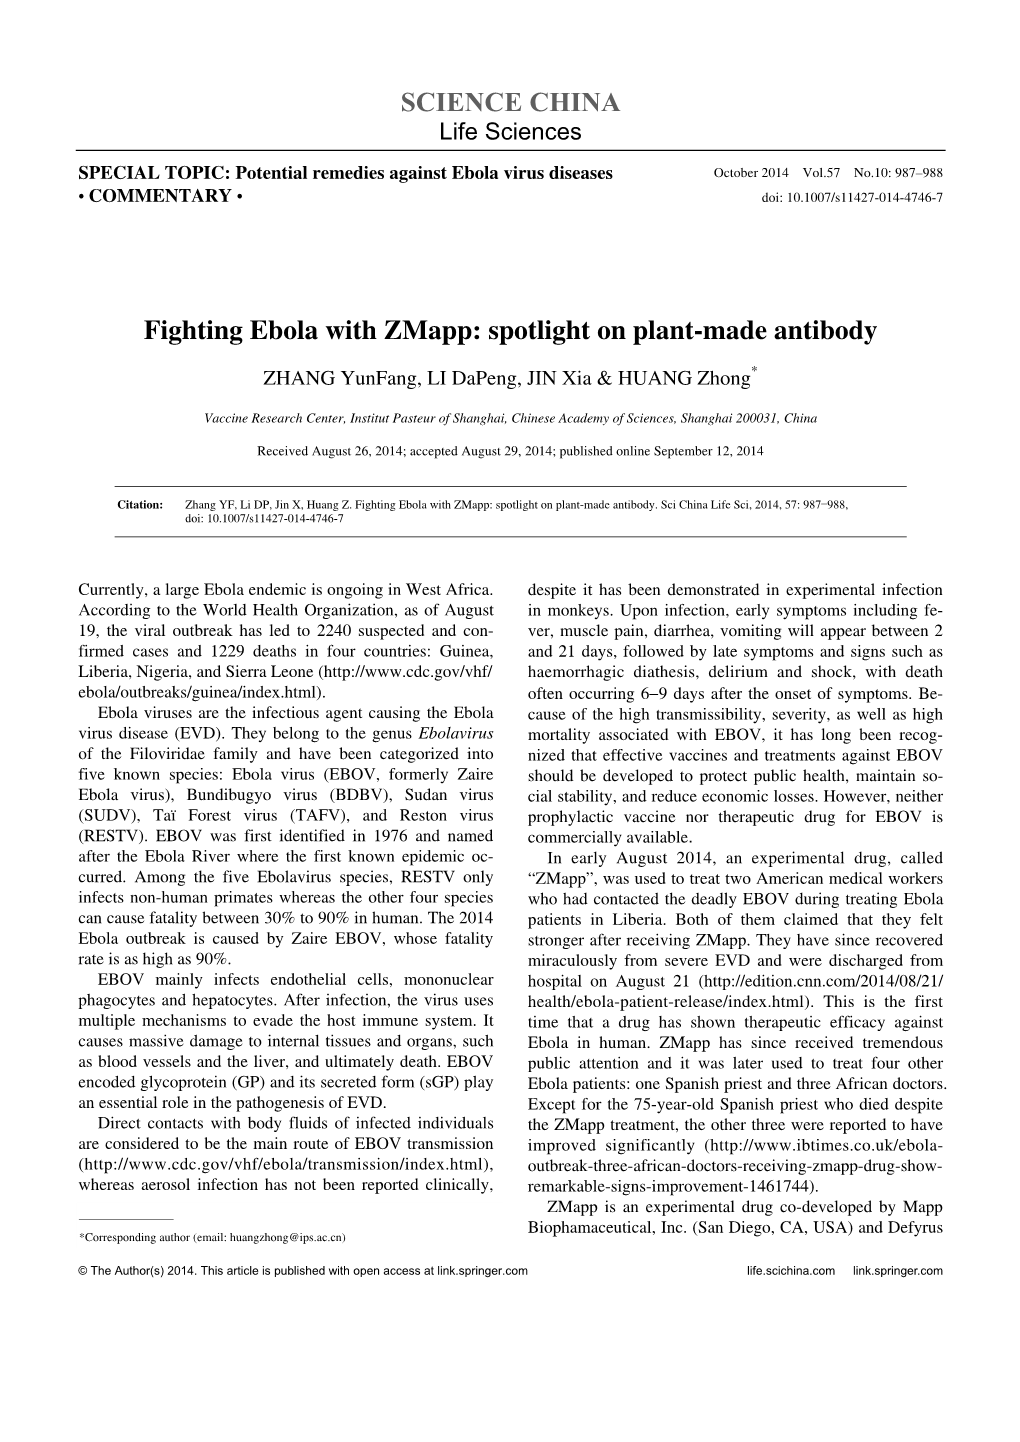 SCIENCE CHINA Fighting Ebola with Zmapp: Spotlight on Plant-Made